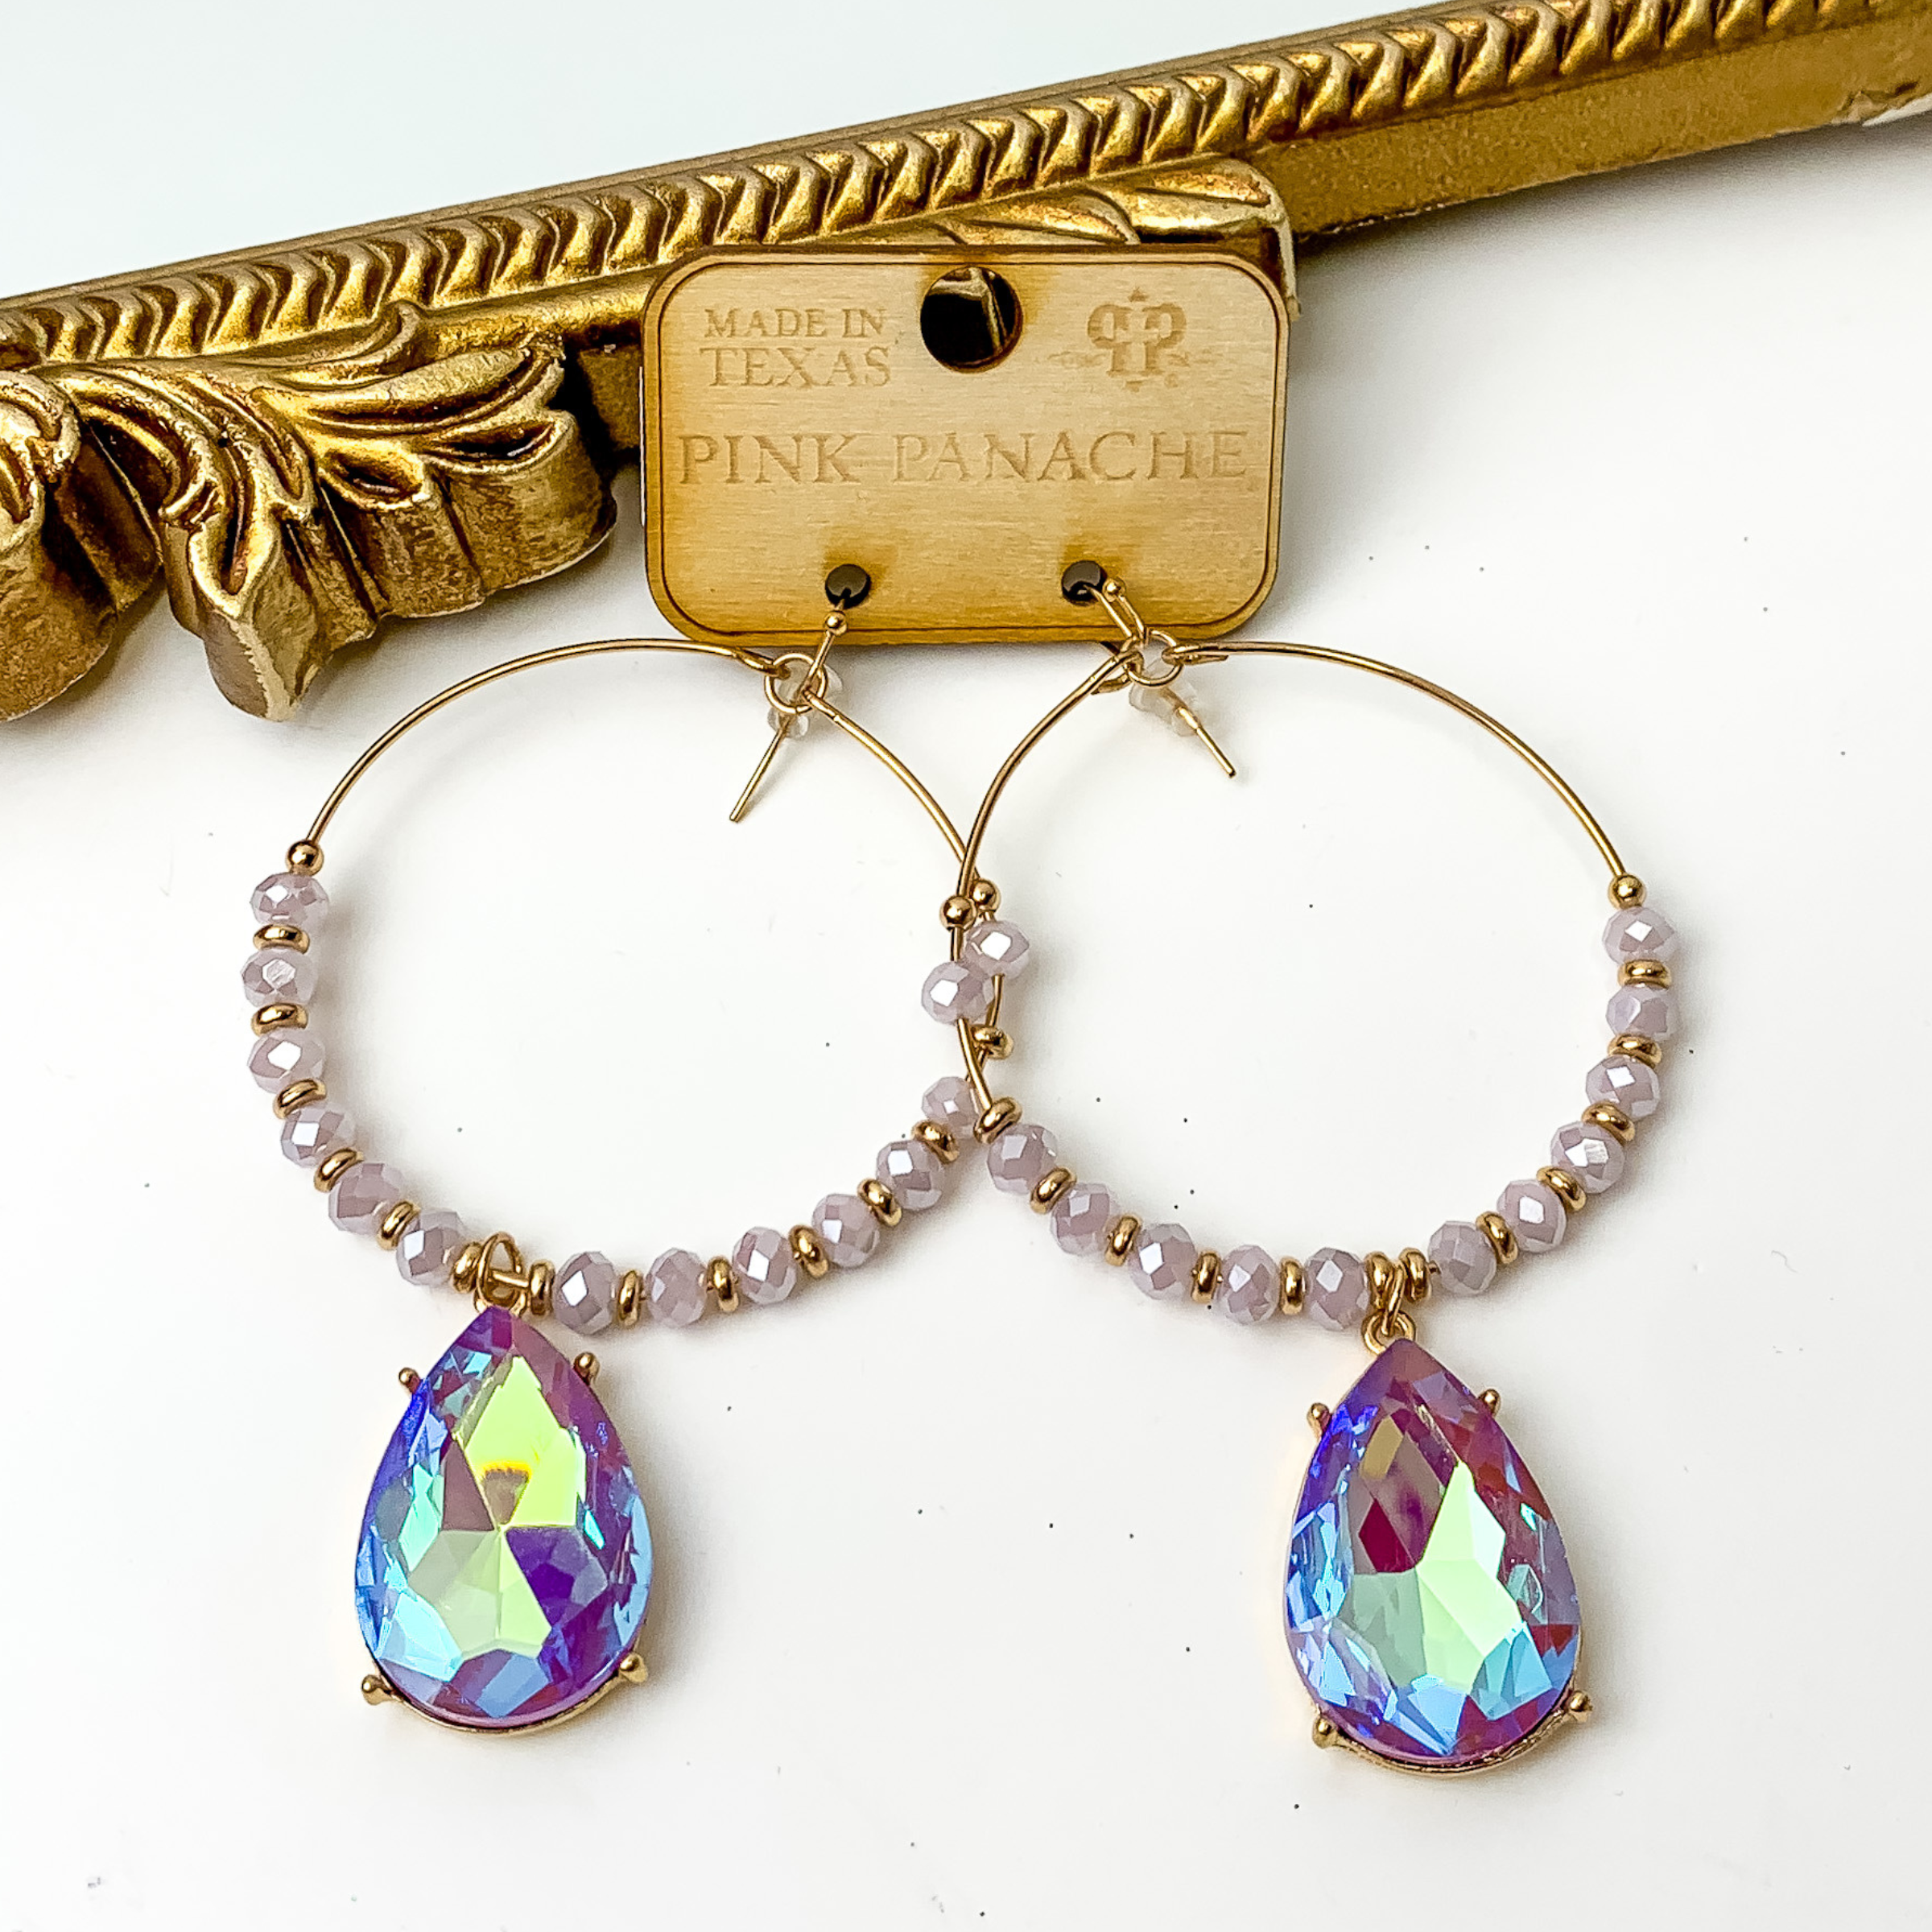 Large gold hoop earrings with lavender and gold beads. These hoops also include a teardrop purple ab crystal charm. These earrings are pictured on a white background with a gold mirror in the top left corner. 